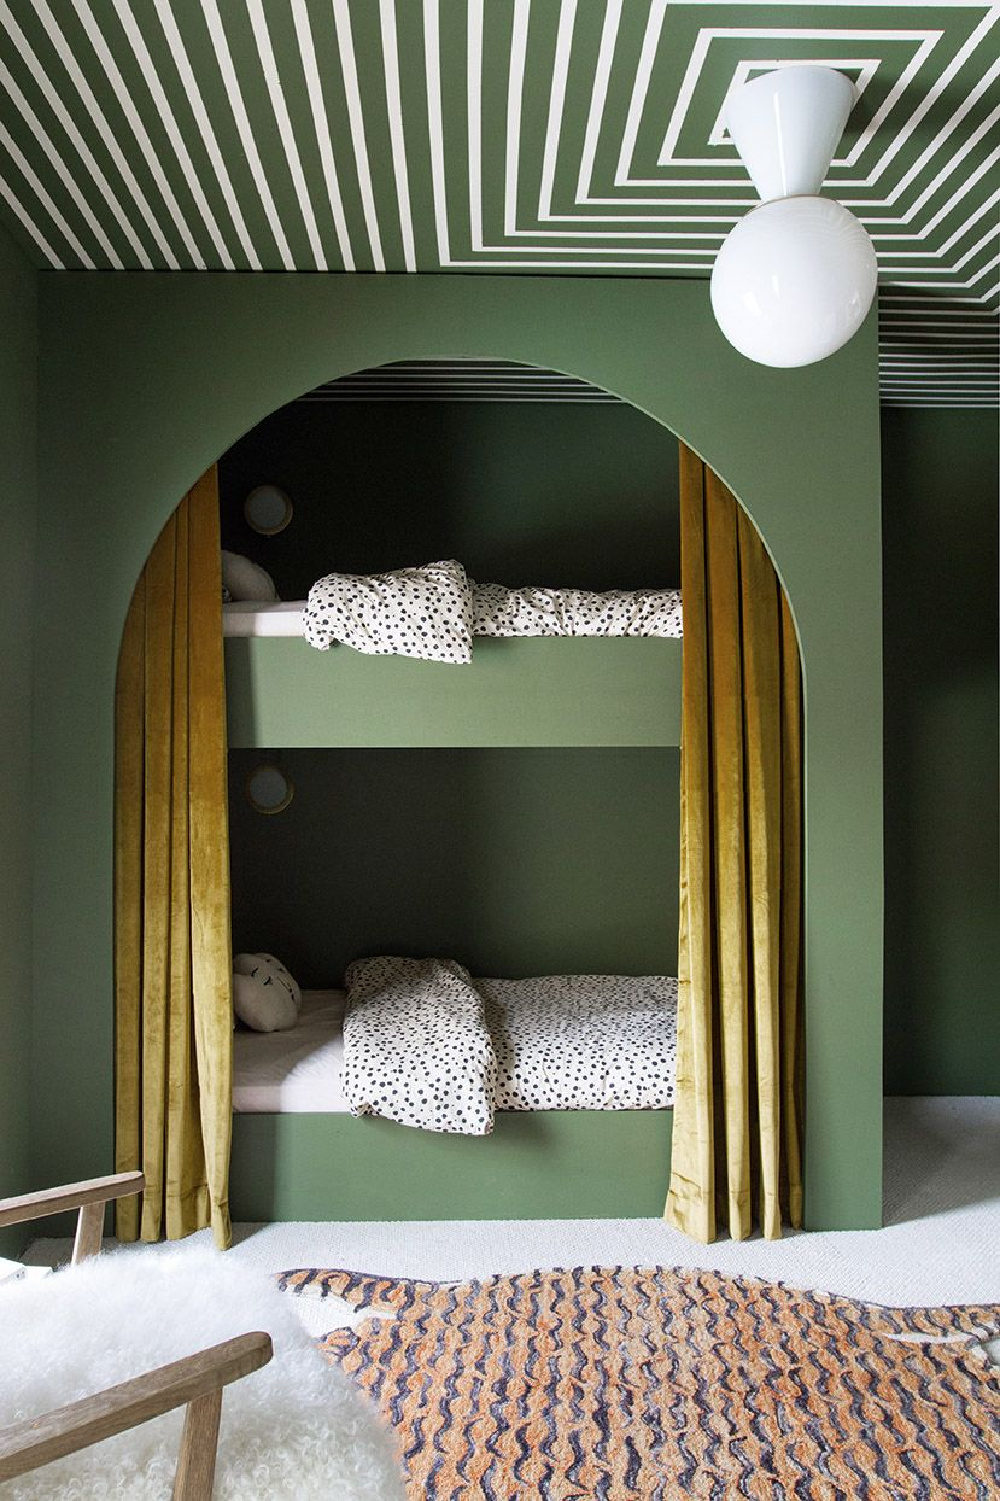 Custom bunk beds with moody deep green and, an arch, and curtains - from The Bunk Bed Book (Gibbs Smith, 2022) by Laura Fenton. #bunkbeds